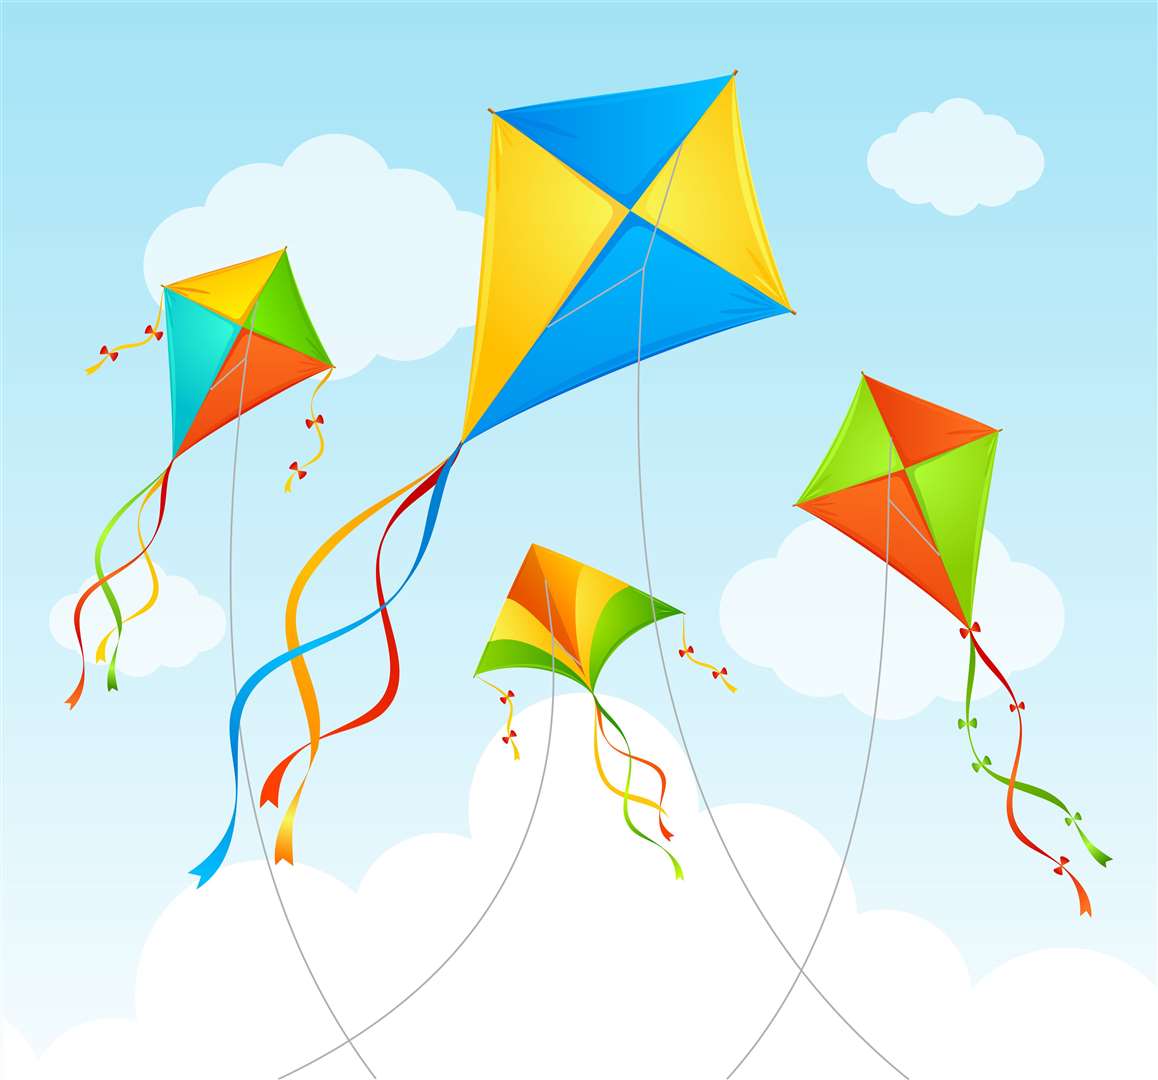 If it is raining or there is no wind on the day, the kite fest will be postponed until the following Friday, July 22.